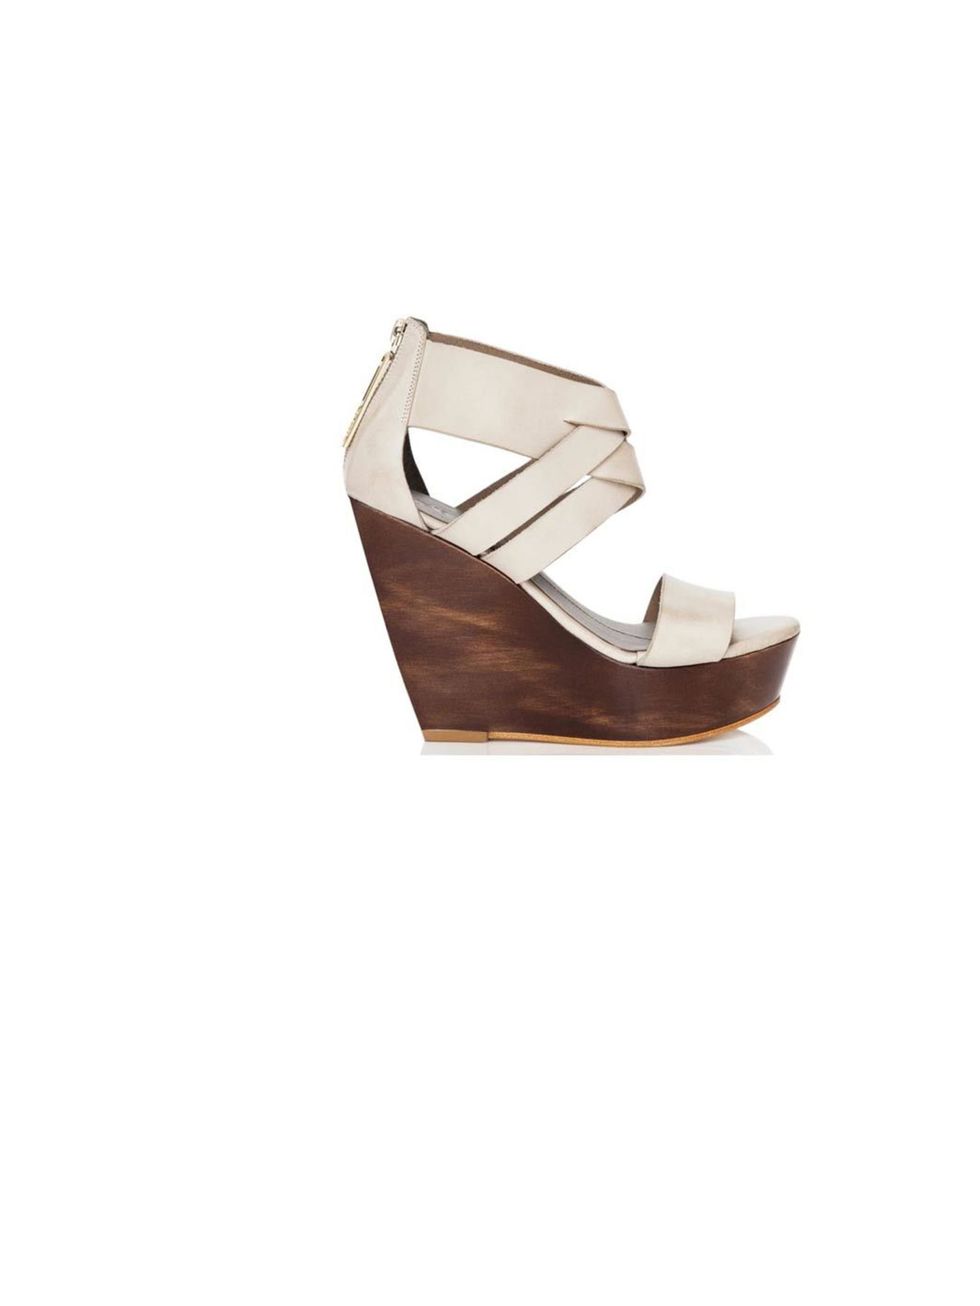 <p>Finsk chunky wedges, £380, at <a href="http://www.thebeachtomatoshack.com/store/view/finsk-cream-chunky-wooden-wedges/?Pid=291&amp;CategoryId=3">The Beach Tomato Shack</a></p>